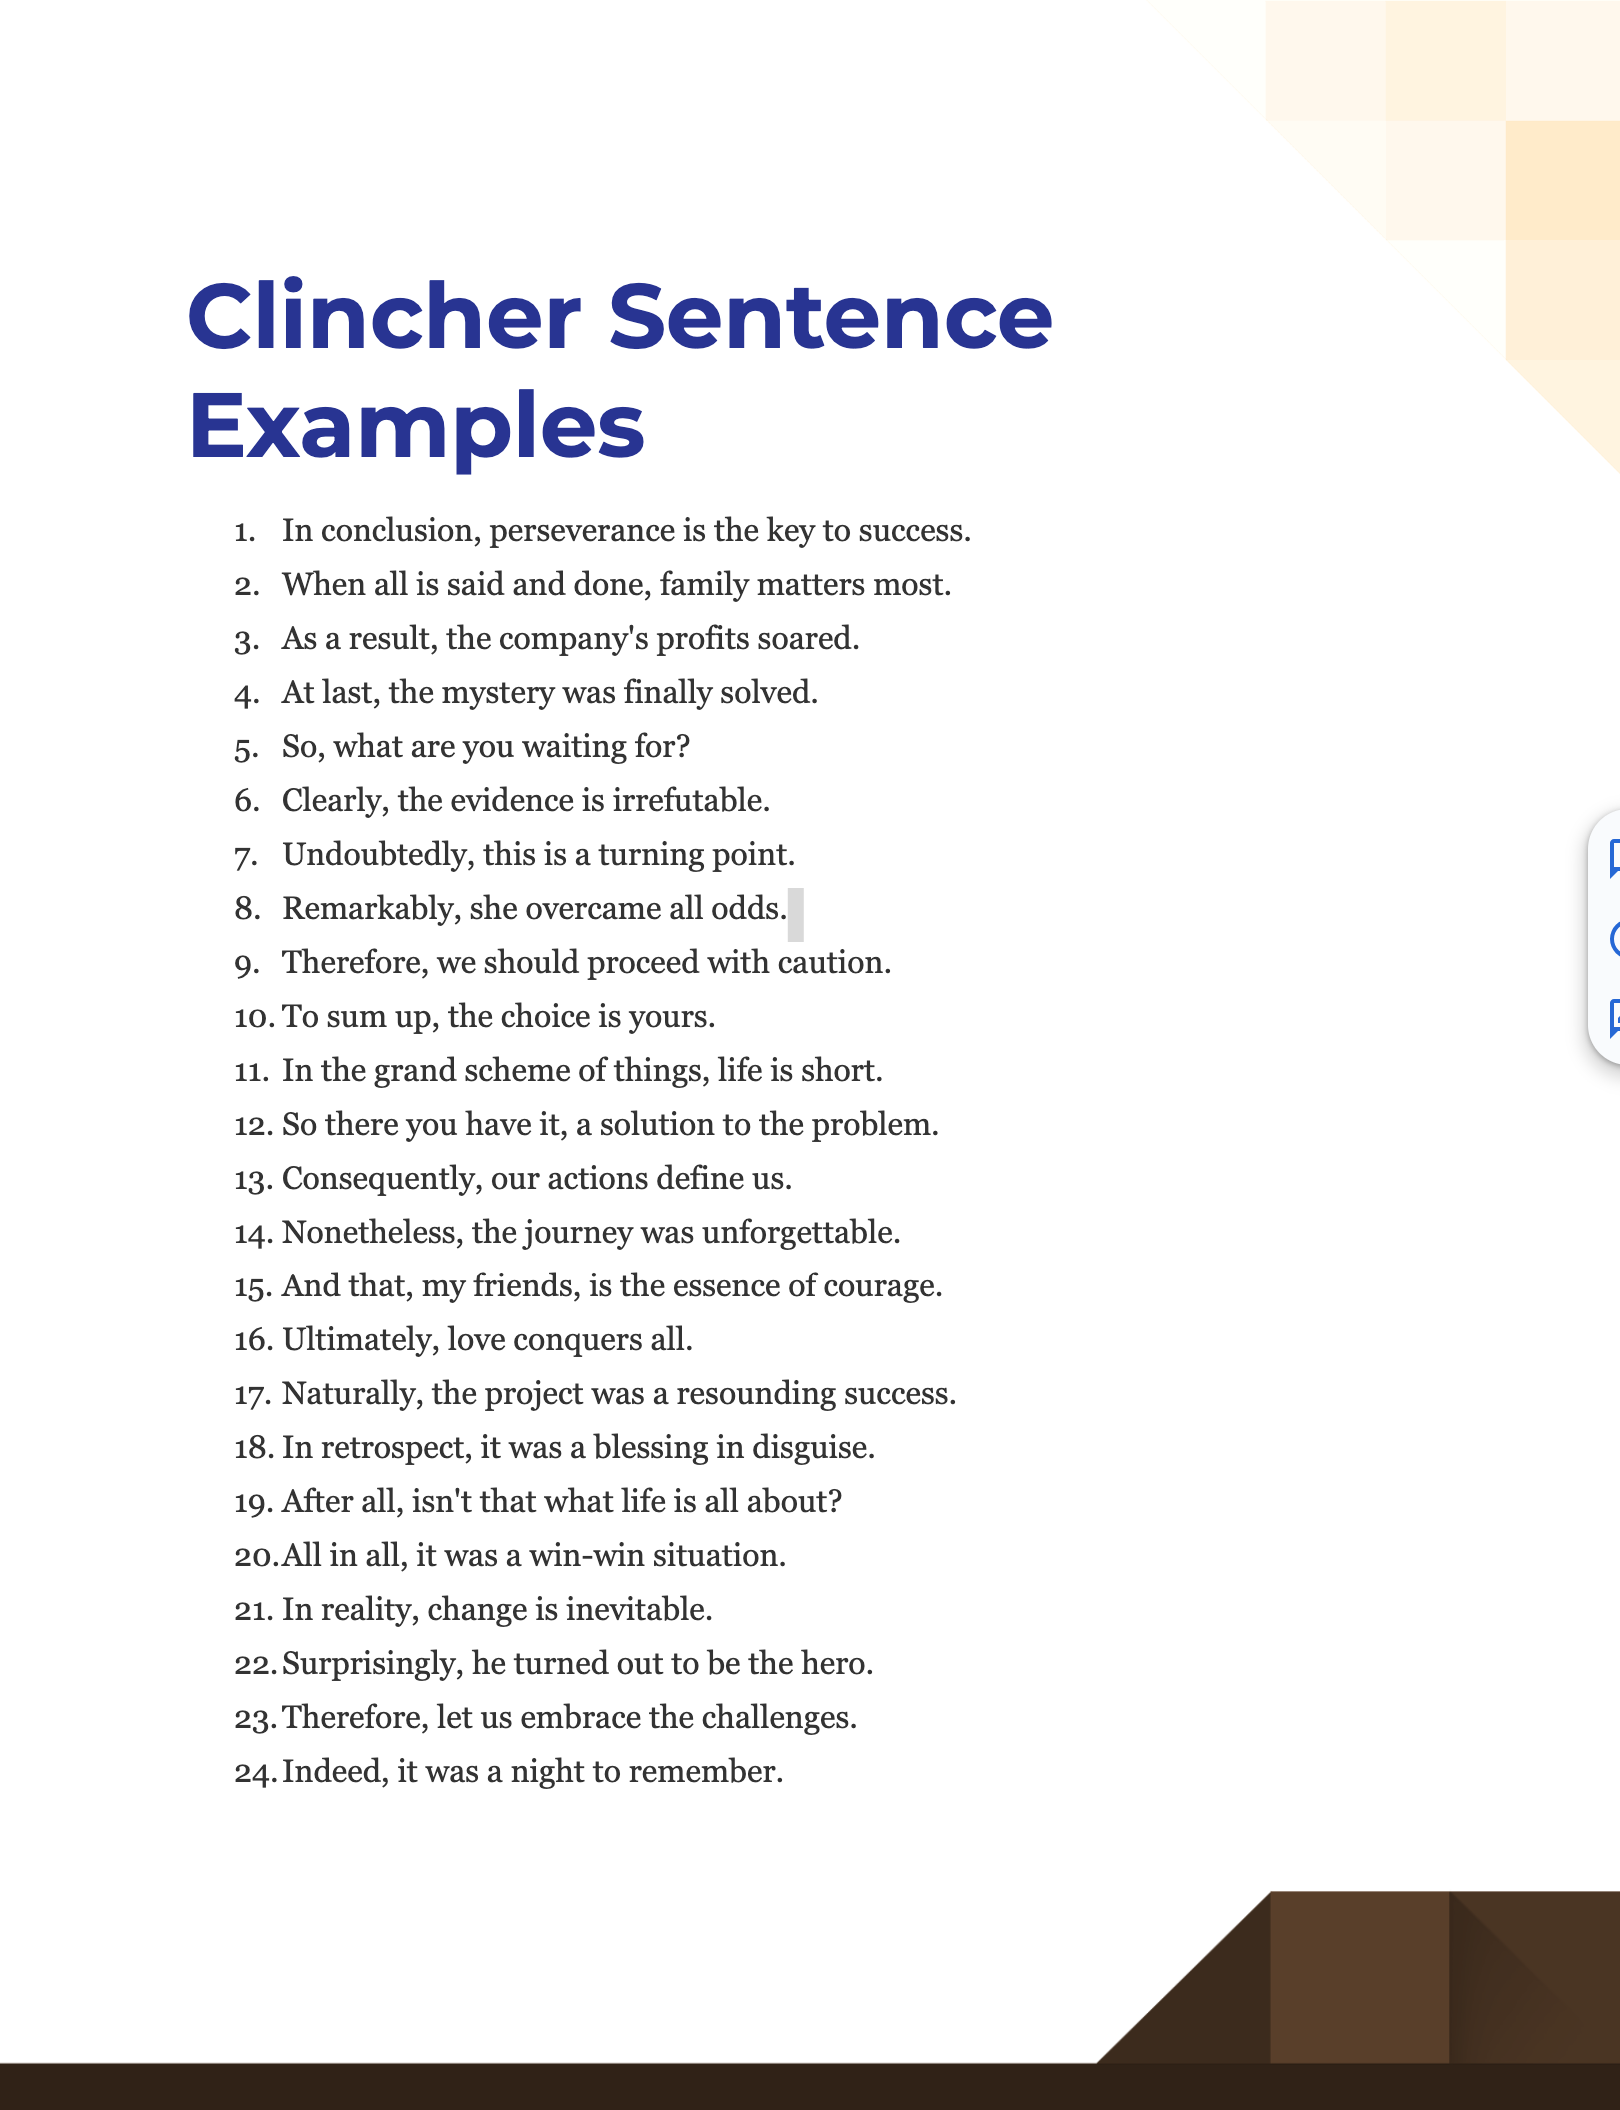 essay clincher clincher sentence examples